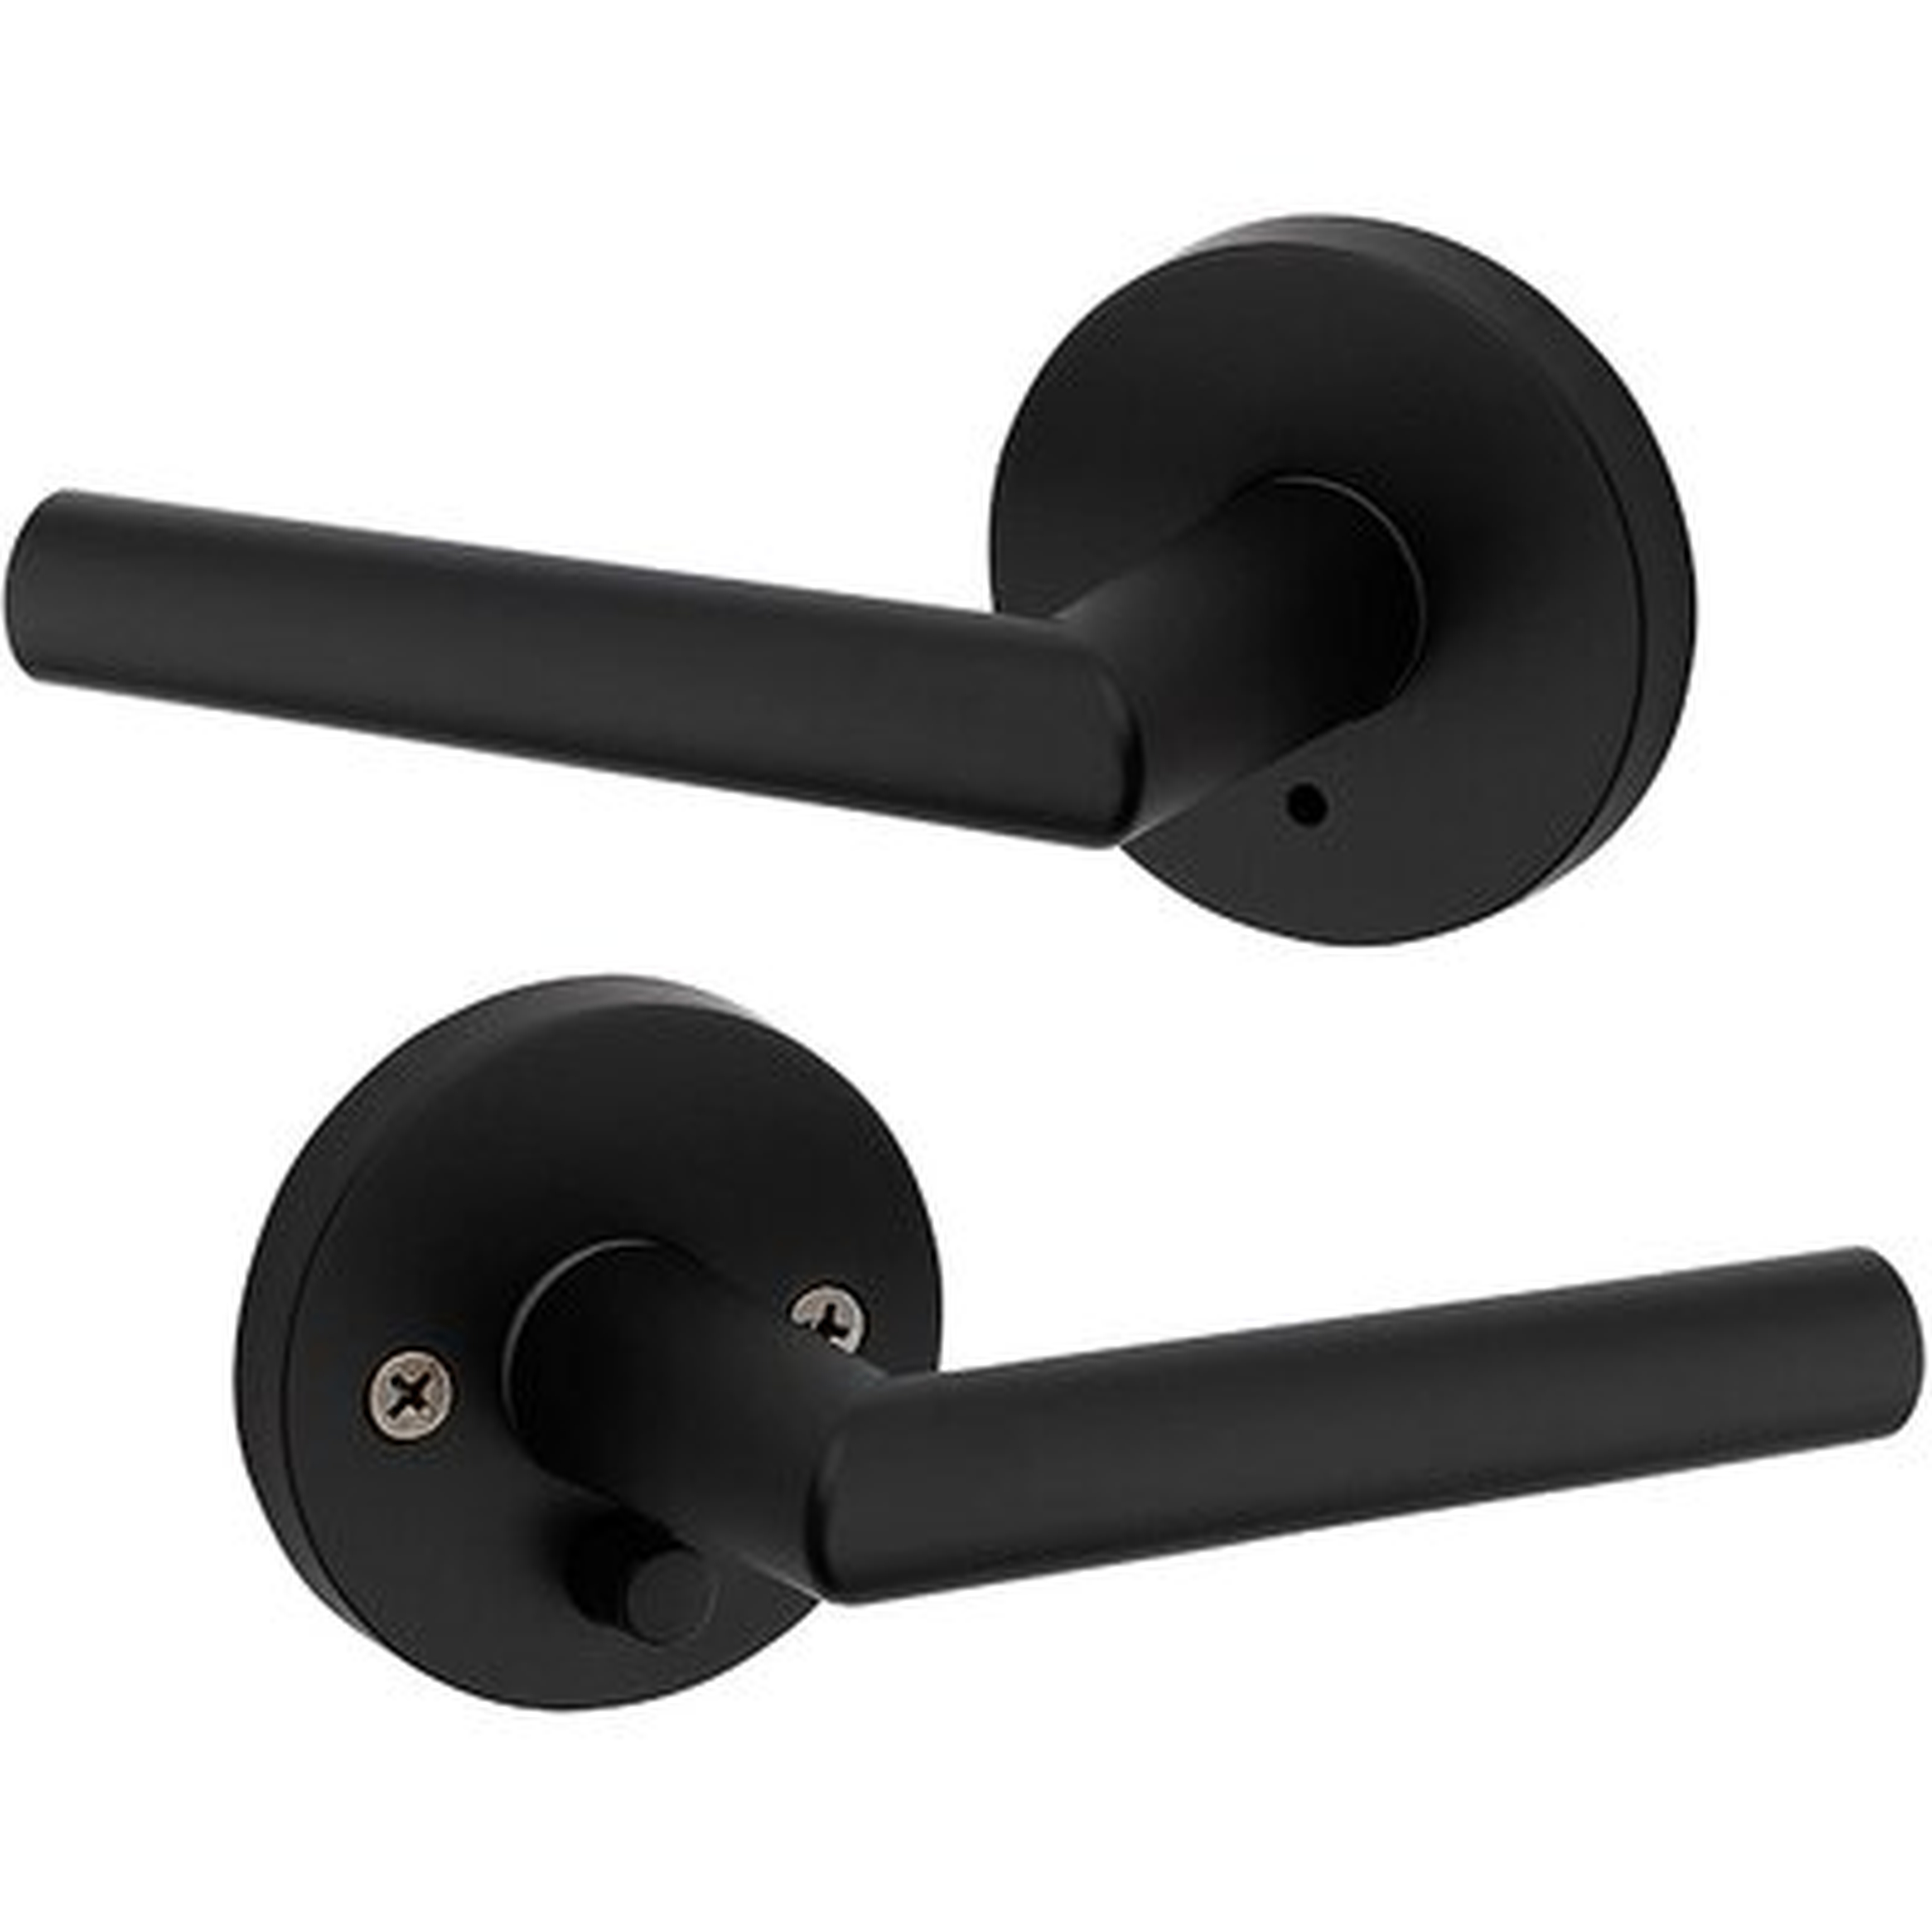 Milan Door Handle, With A Modern And Modern Ultra-Thin Circular Design, Is Perfect For Family Bedroom Or Bathroom Privacy - Wayfair